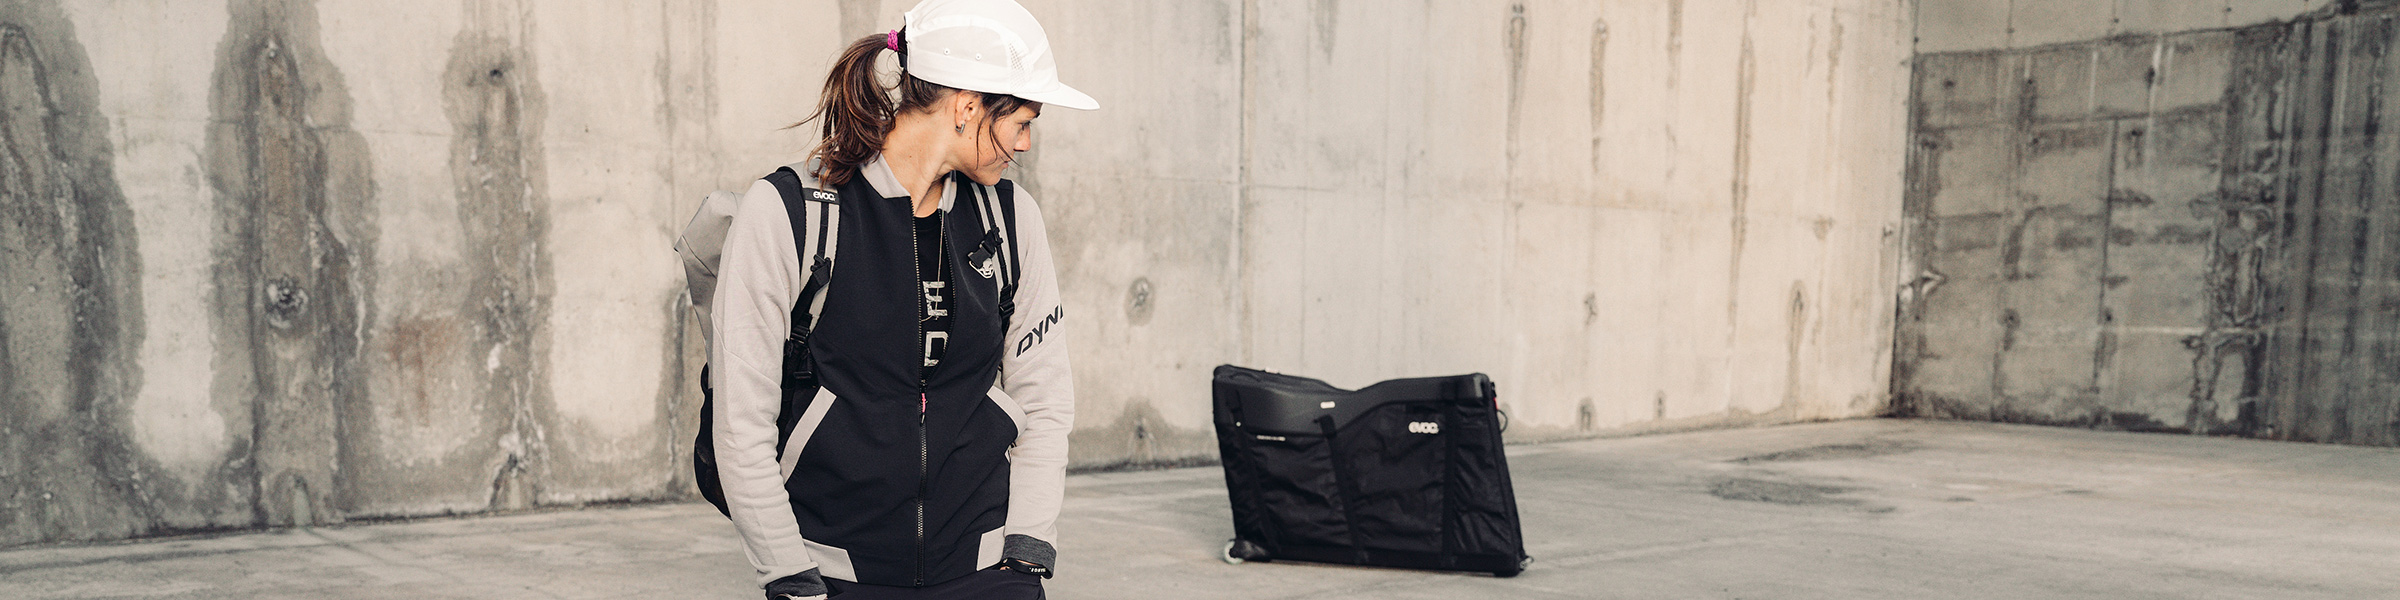 Bike-backpacks and sports equipment with climate-neutral shipping